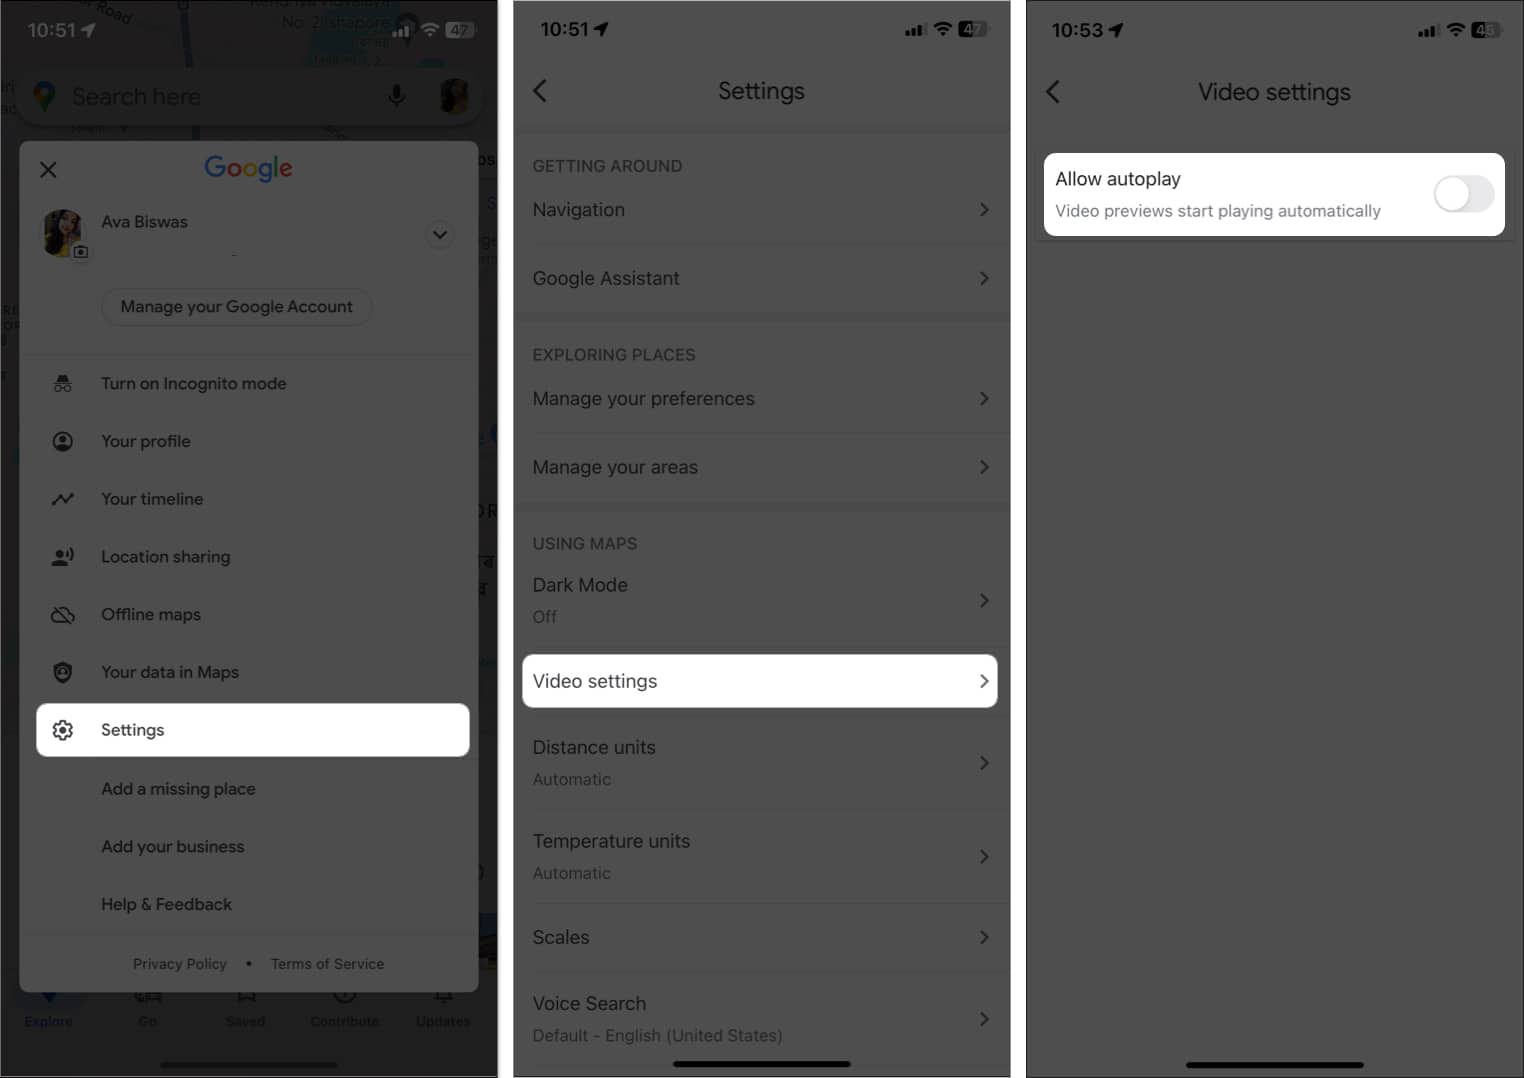 go to profile, settings, video settings, toggle off allow auto-play in google maps